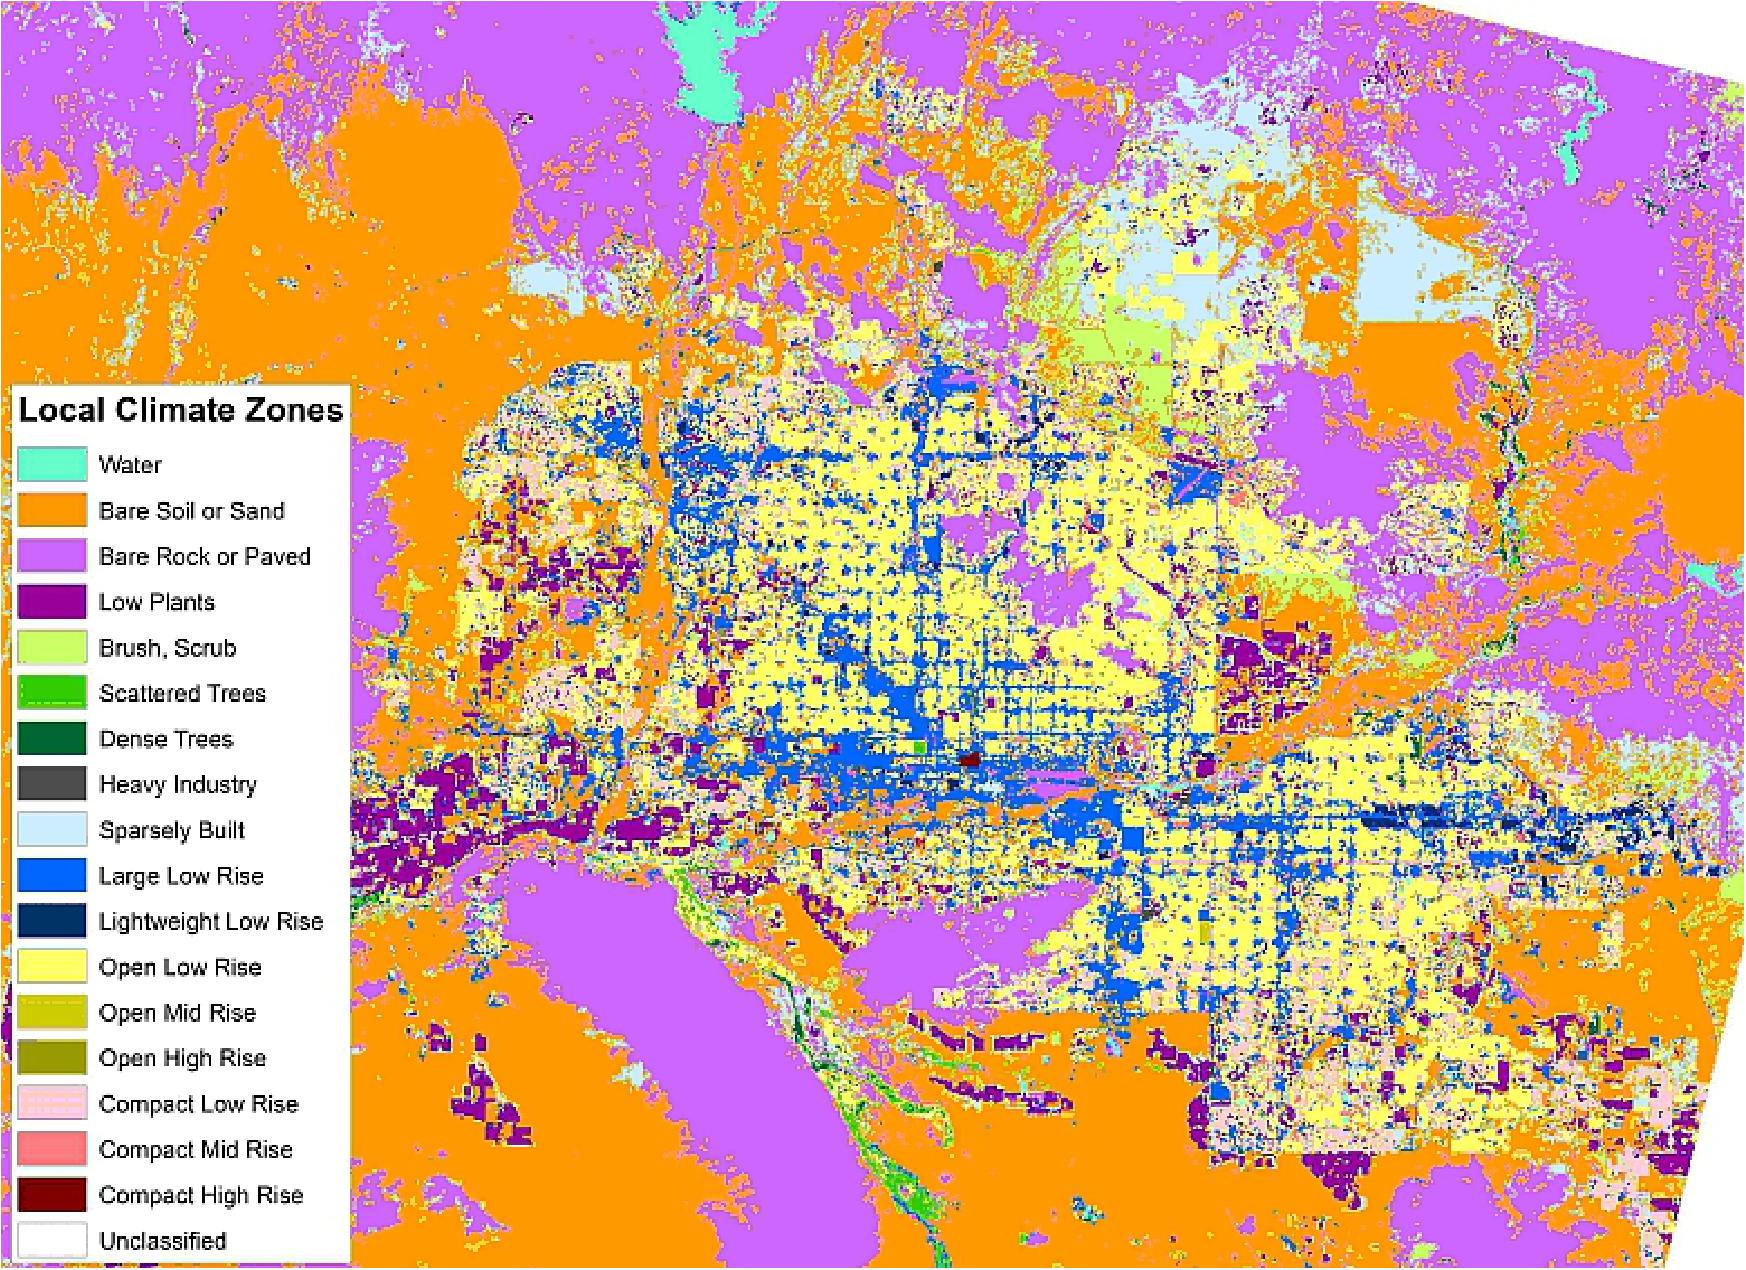 Figure 3: Local climate zone map of phoenix, AZ – taken from our MDR slideshow (image credit: ASU)